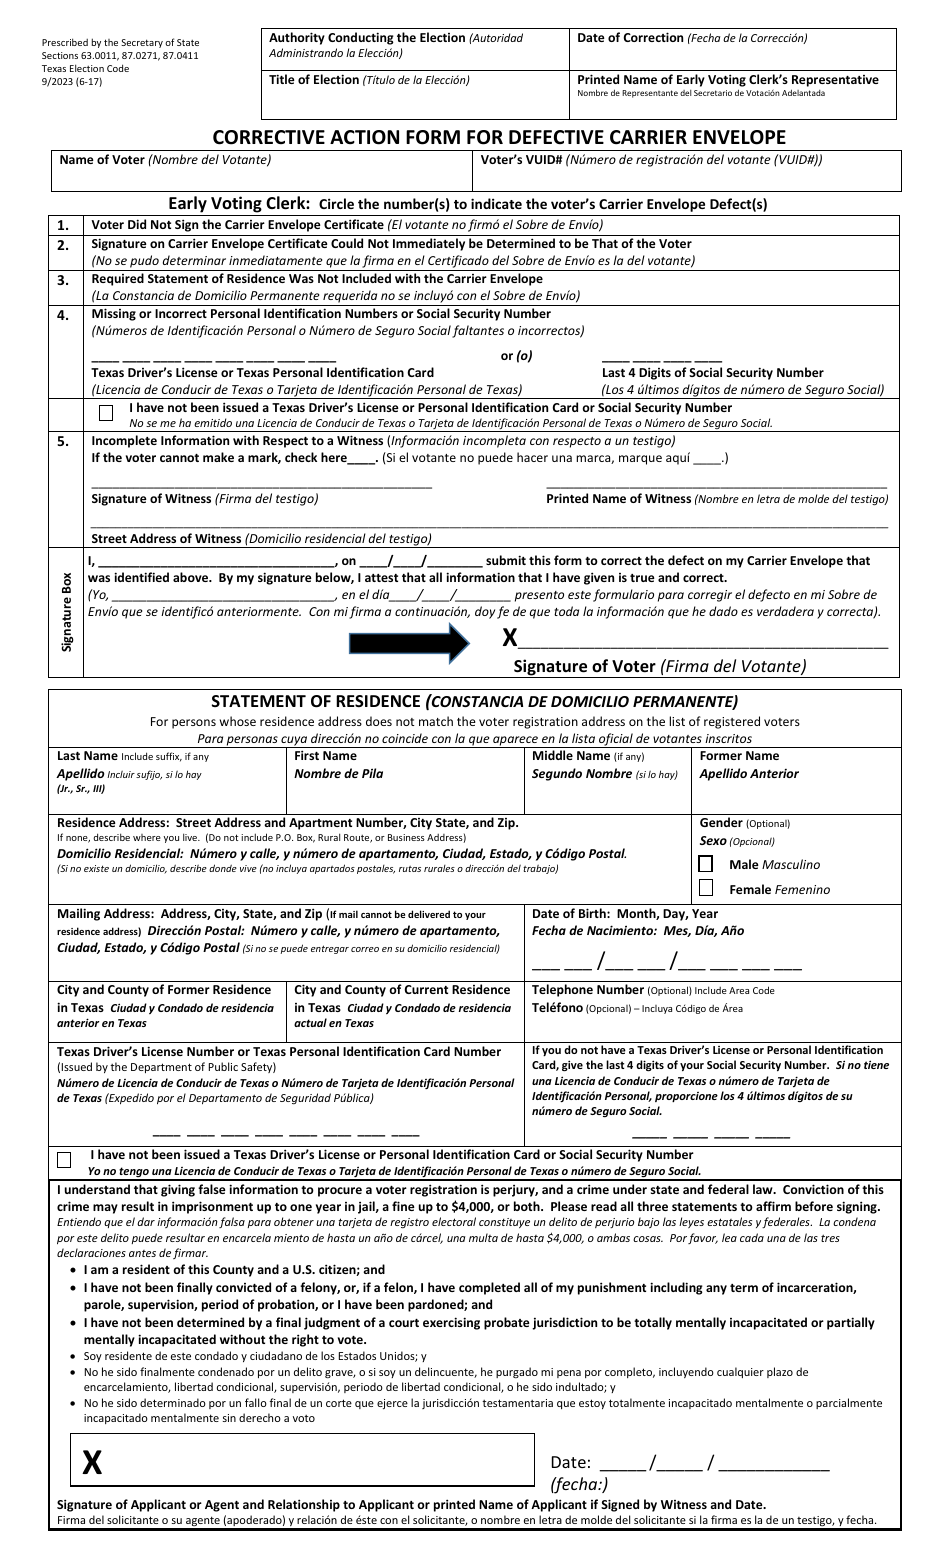 Form 6-17 Corrective Action Form for Defective Carrier Envelope - Texas (English / Spanish), Page 1